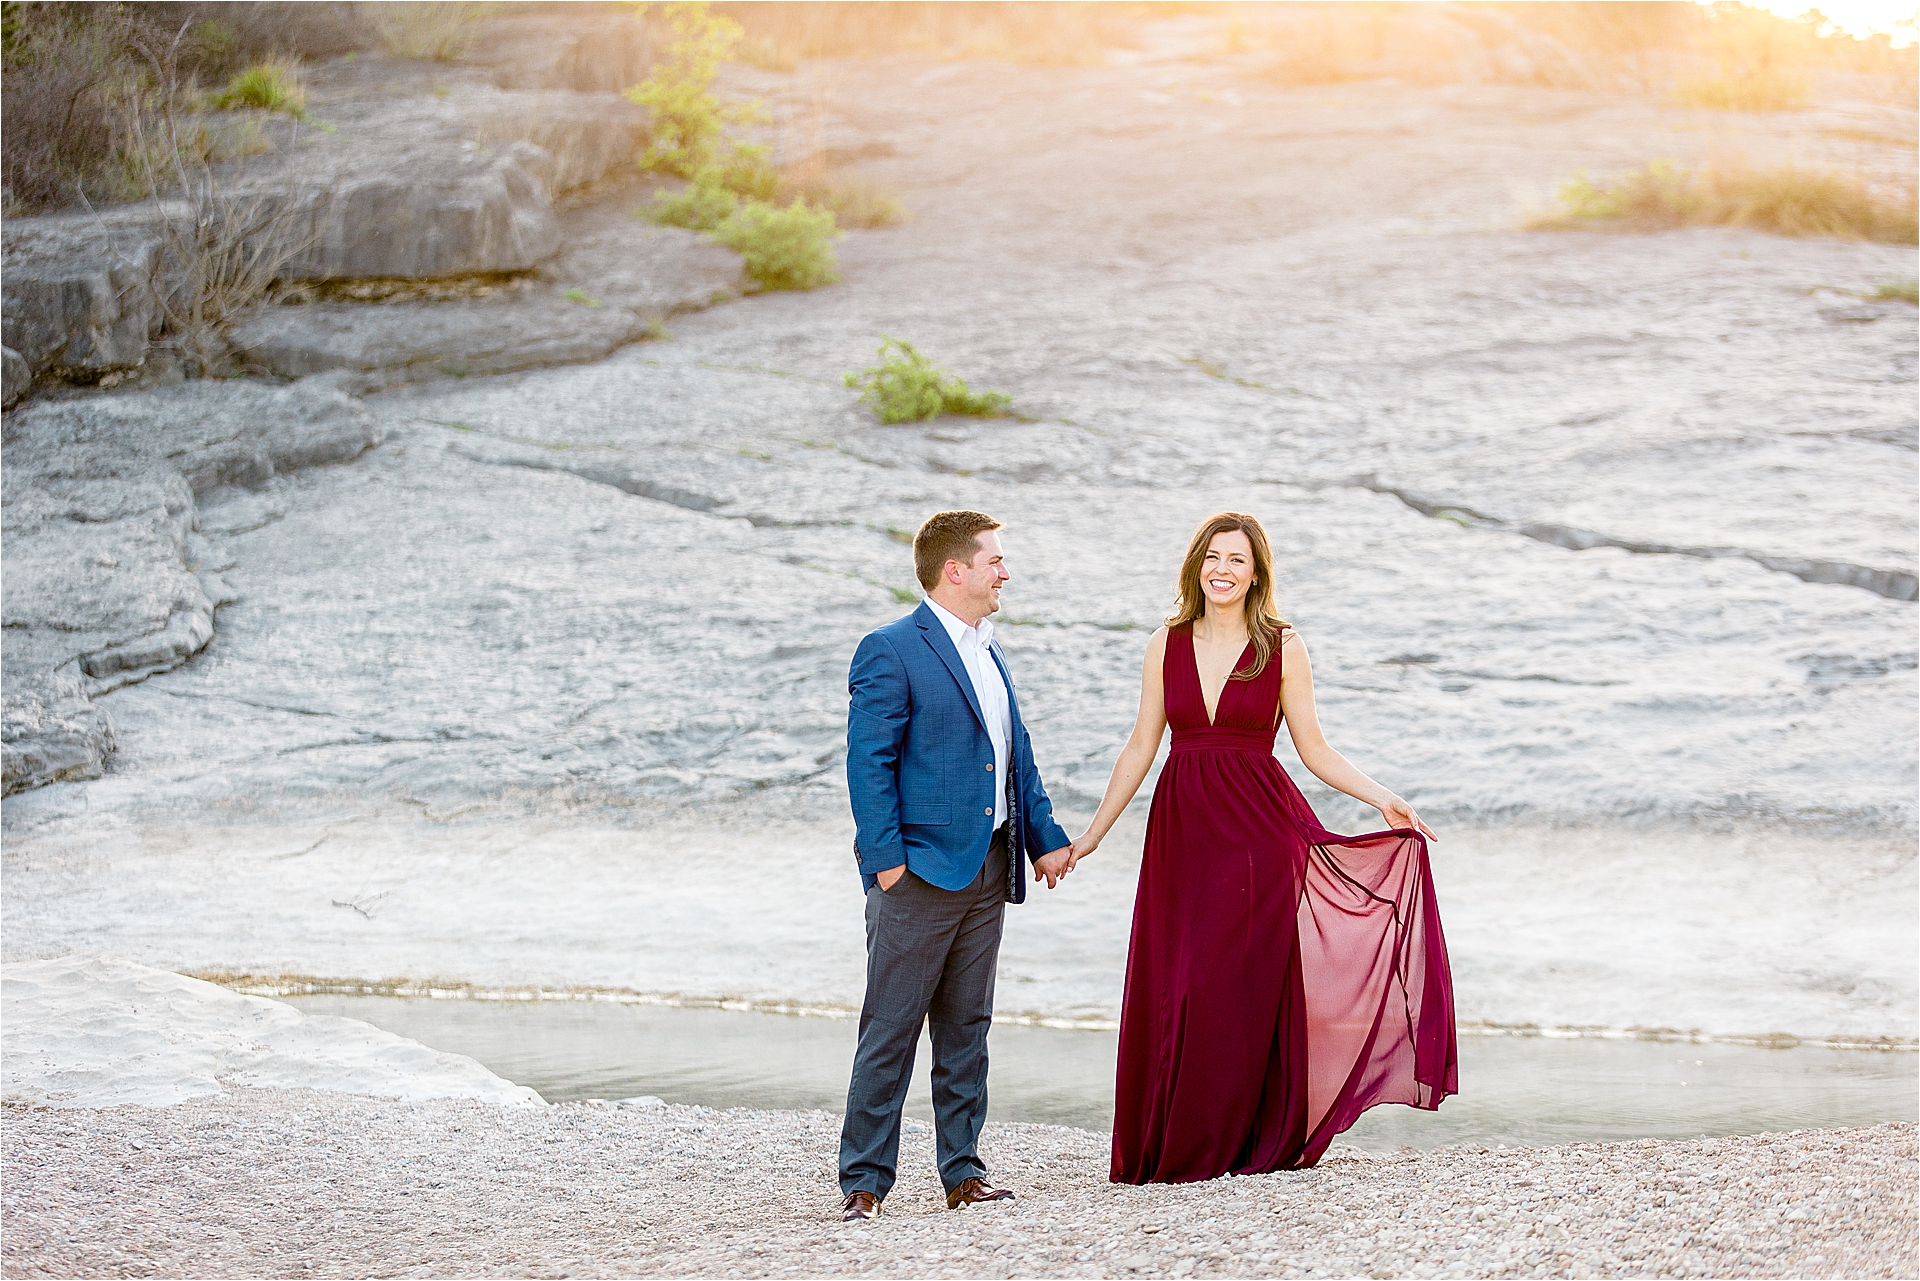 Best Texas Hill Country Engagement Locations near Austin Texas | Pedernales Falls State Park 